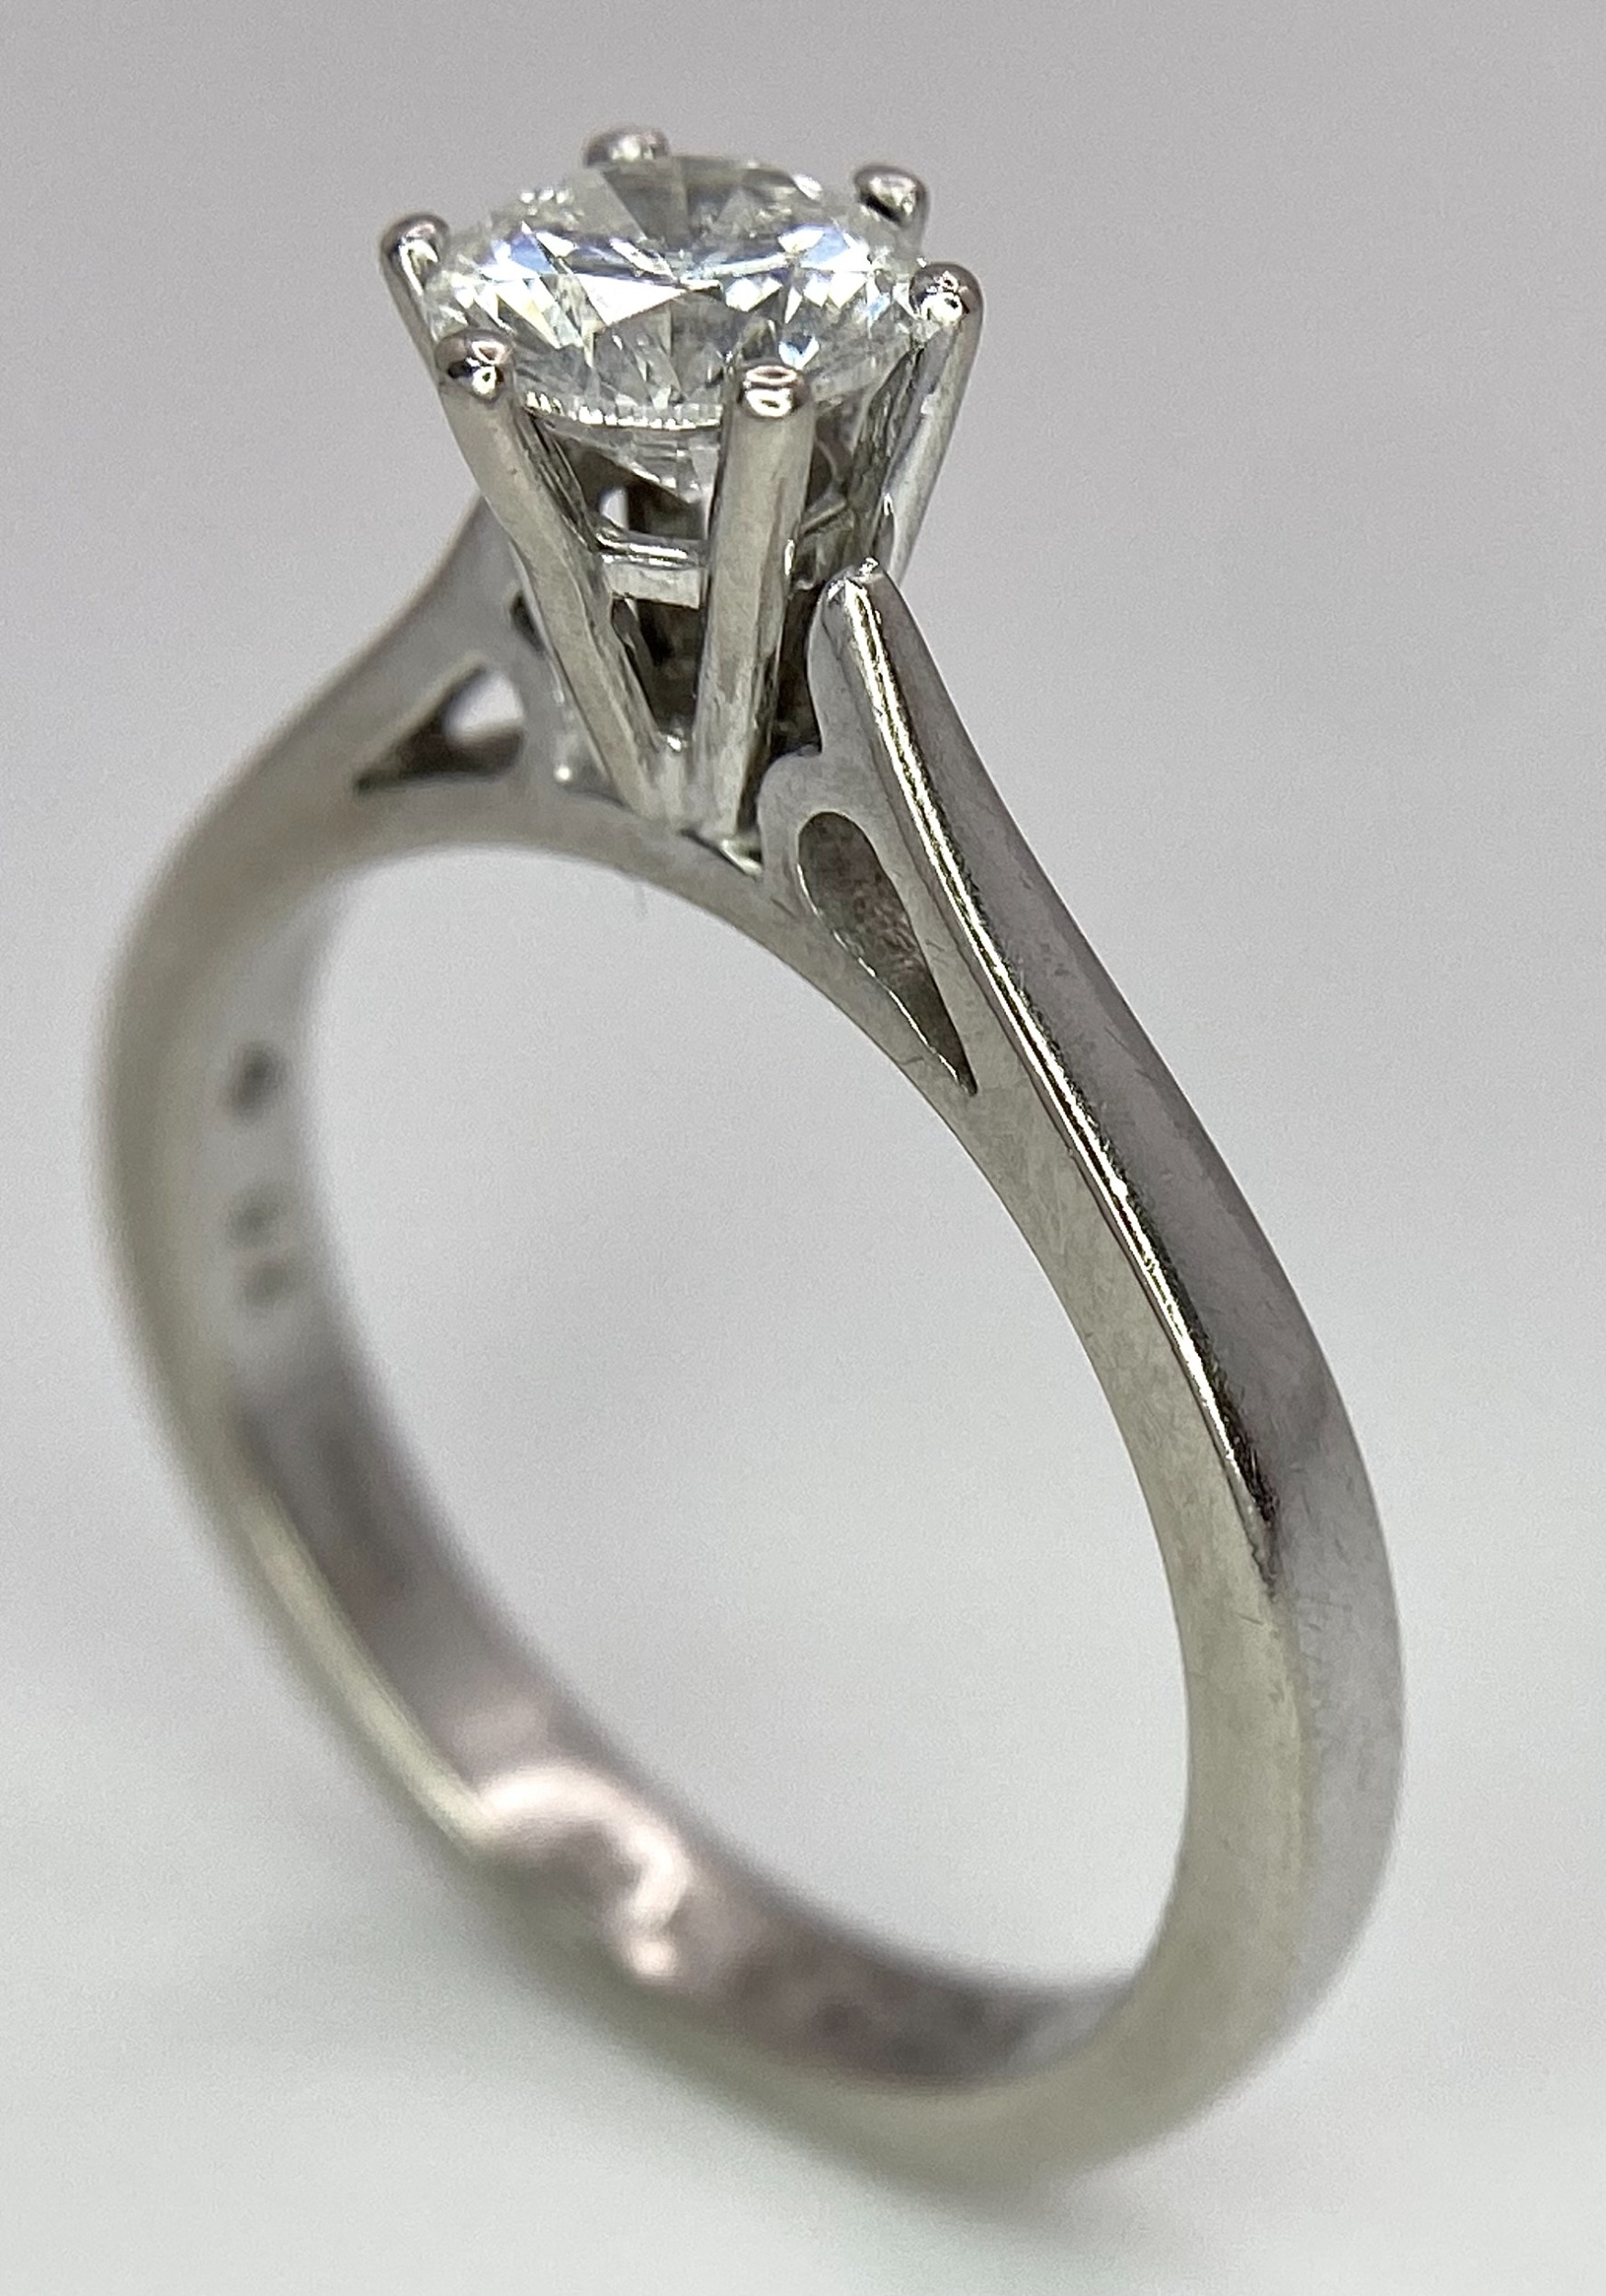 AN 18K WHITE GOLD DIAMOND SOLITAIRE RING - BRILLIANT ROUND CUT 0.70CT. 4.2G. SIZE M - Image 5 of 9